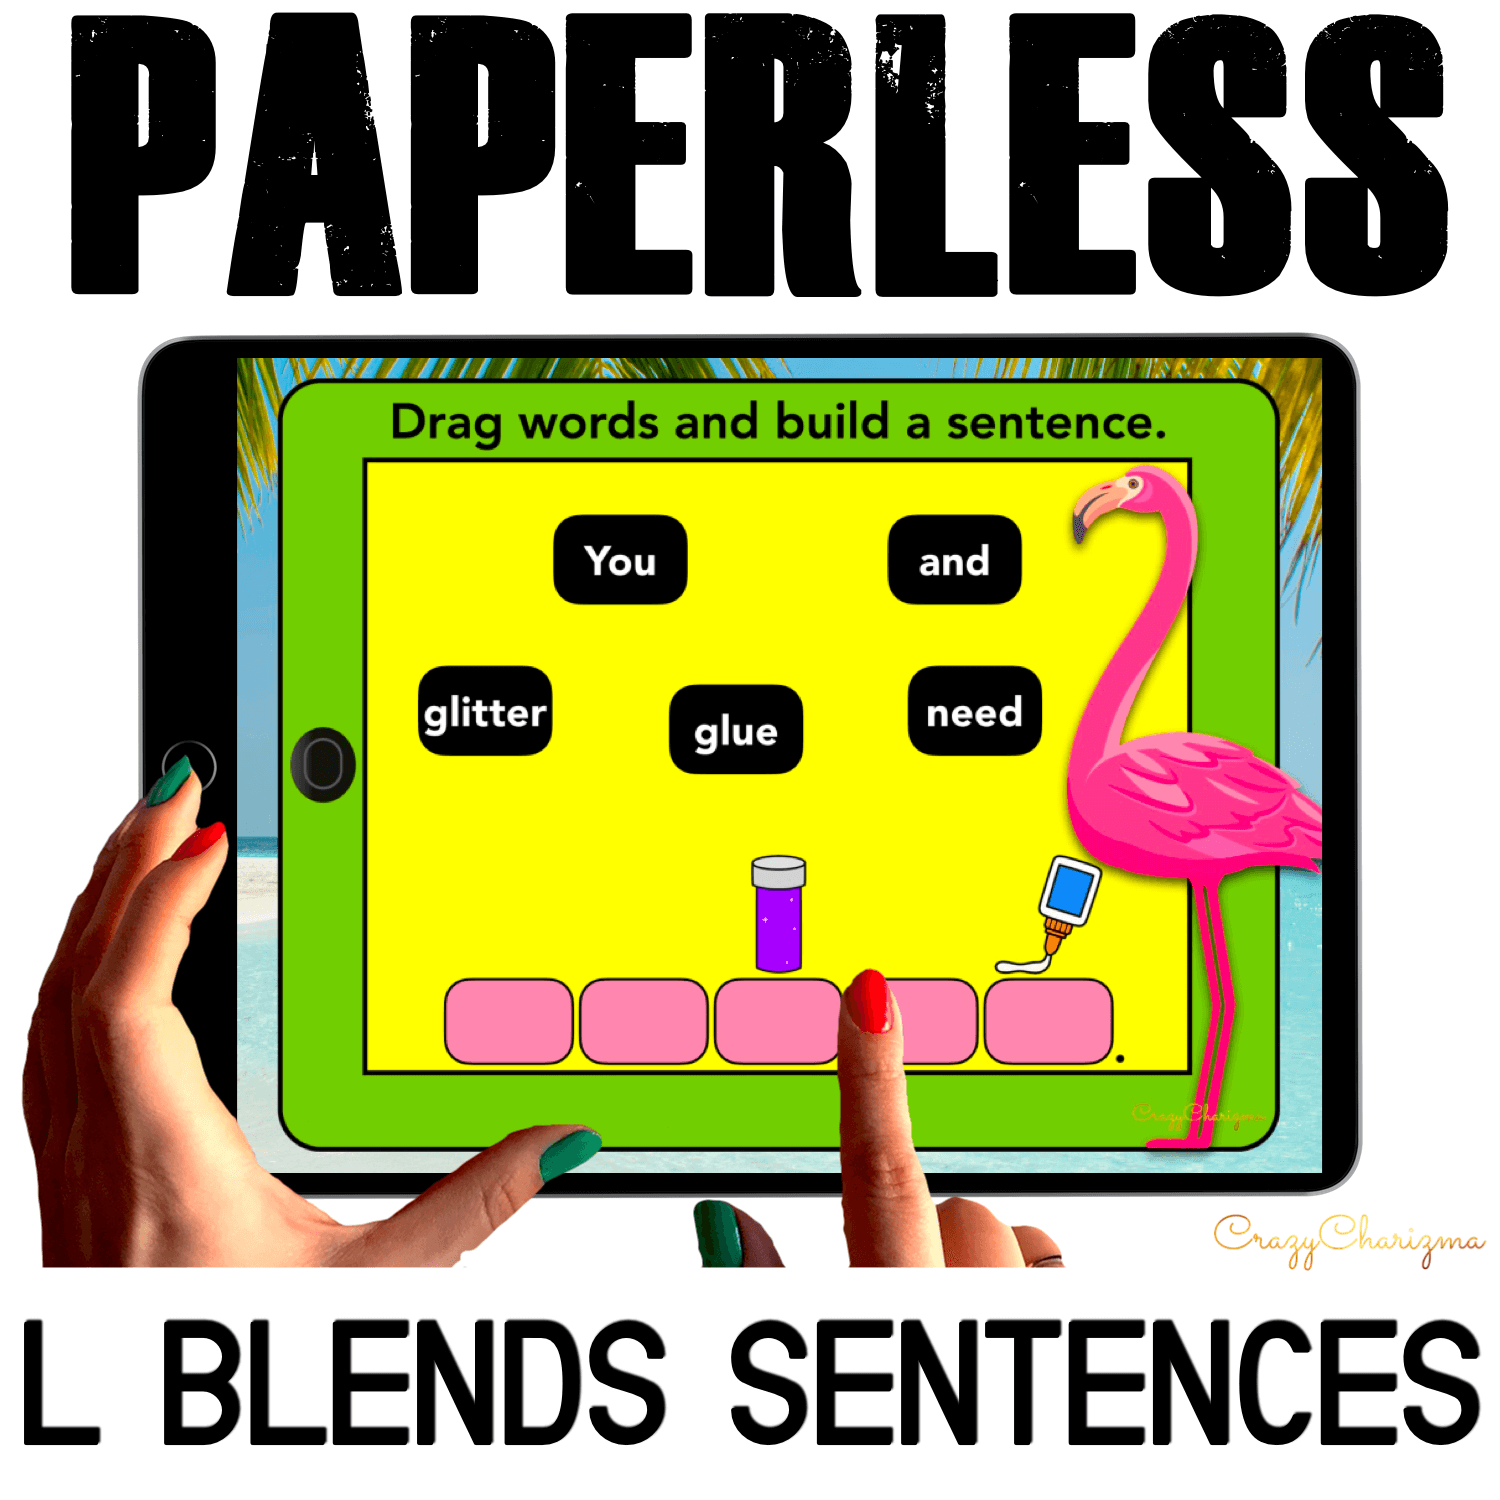 Need to practice beginning L BLENDS in sentences? Check out these interactive slides for Google Classroom. Kids will drag words and build sentences in the tropics!